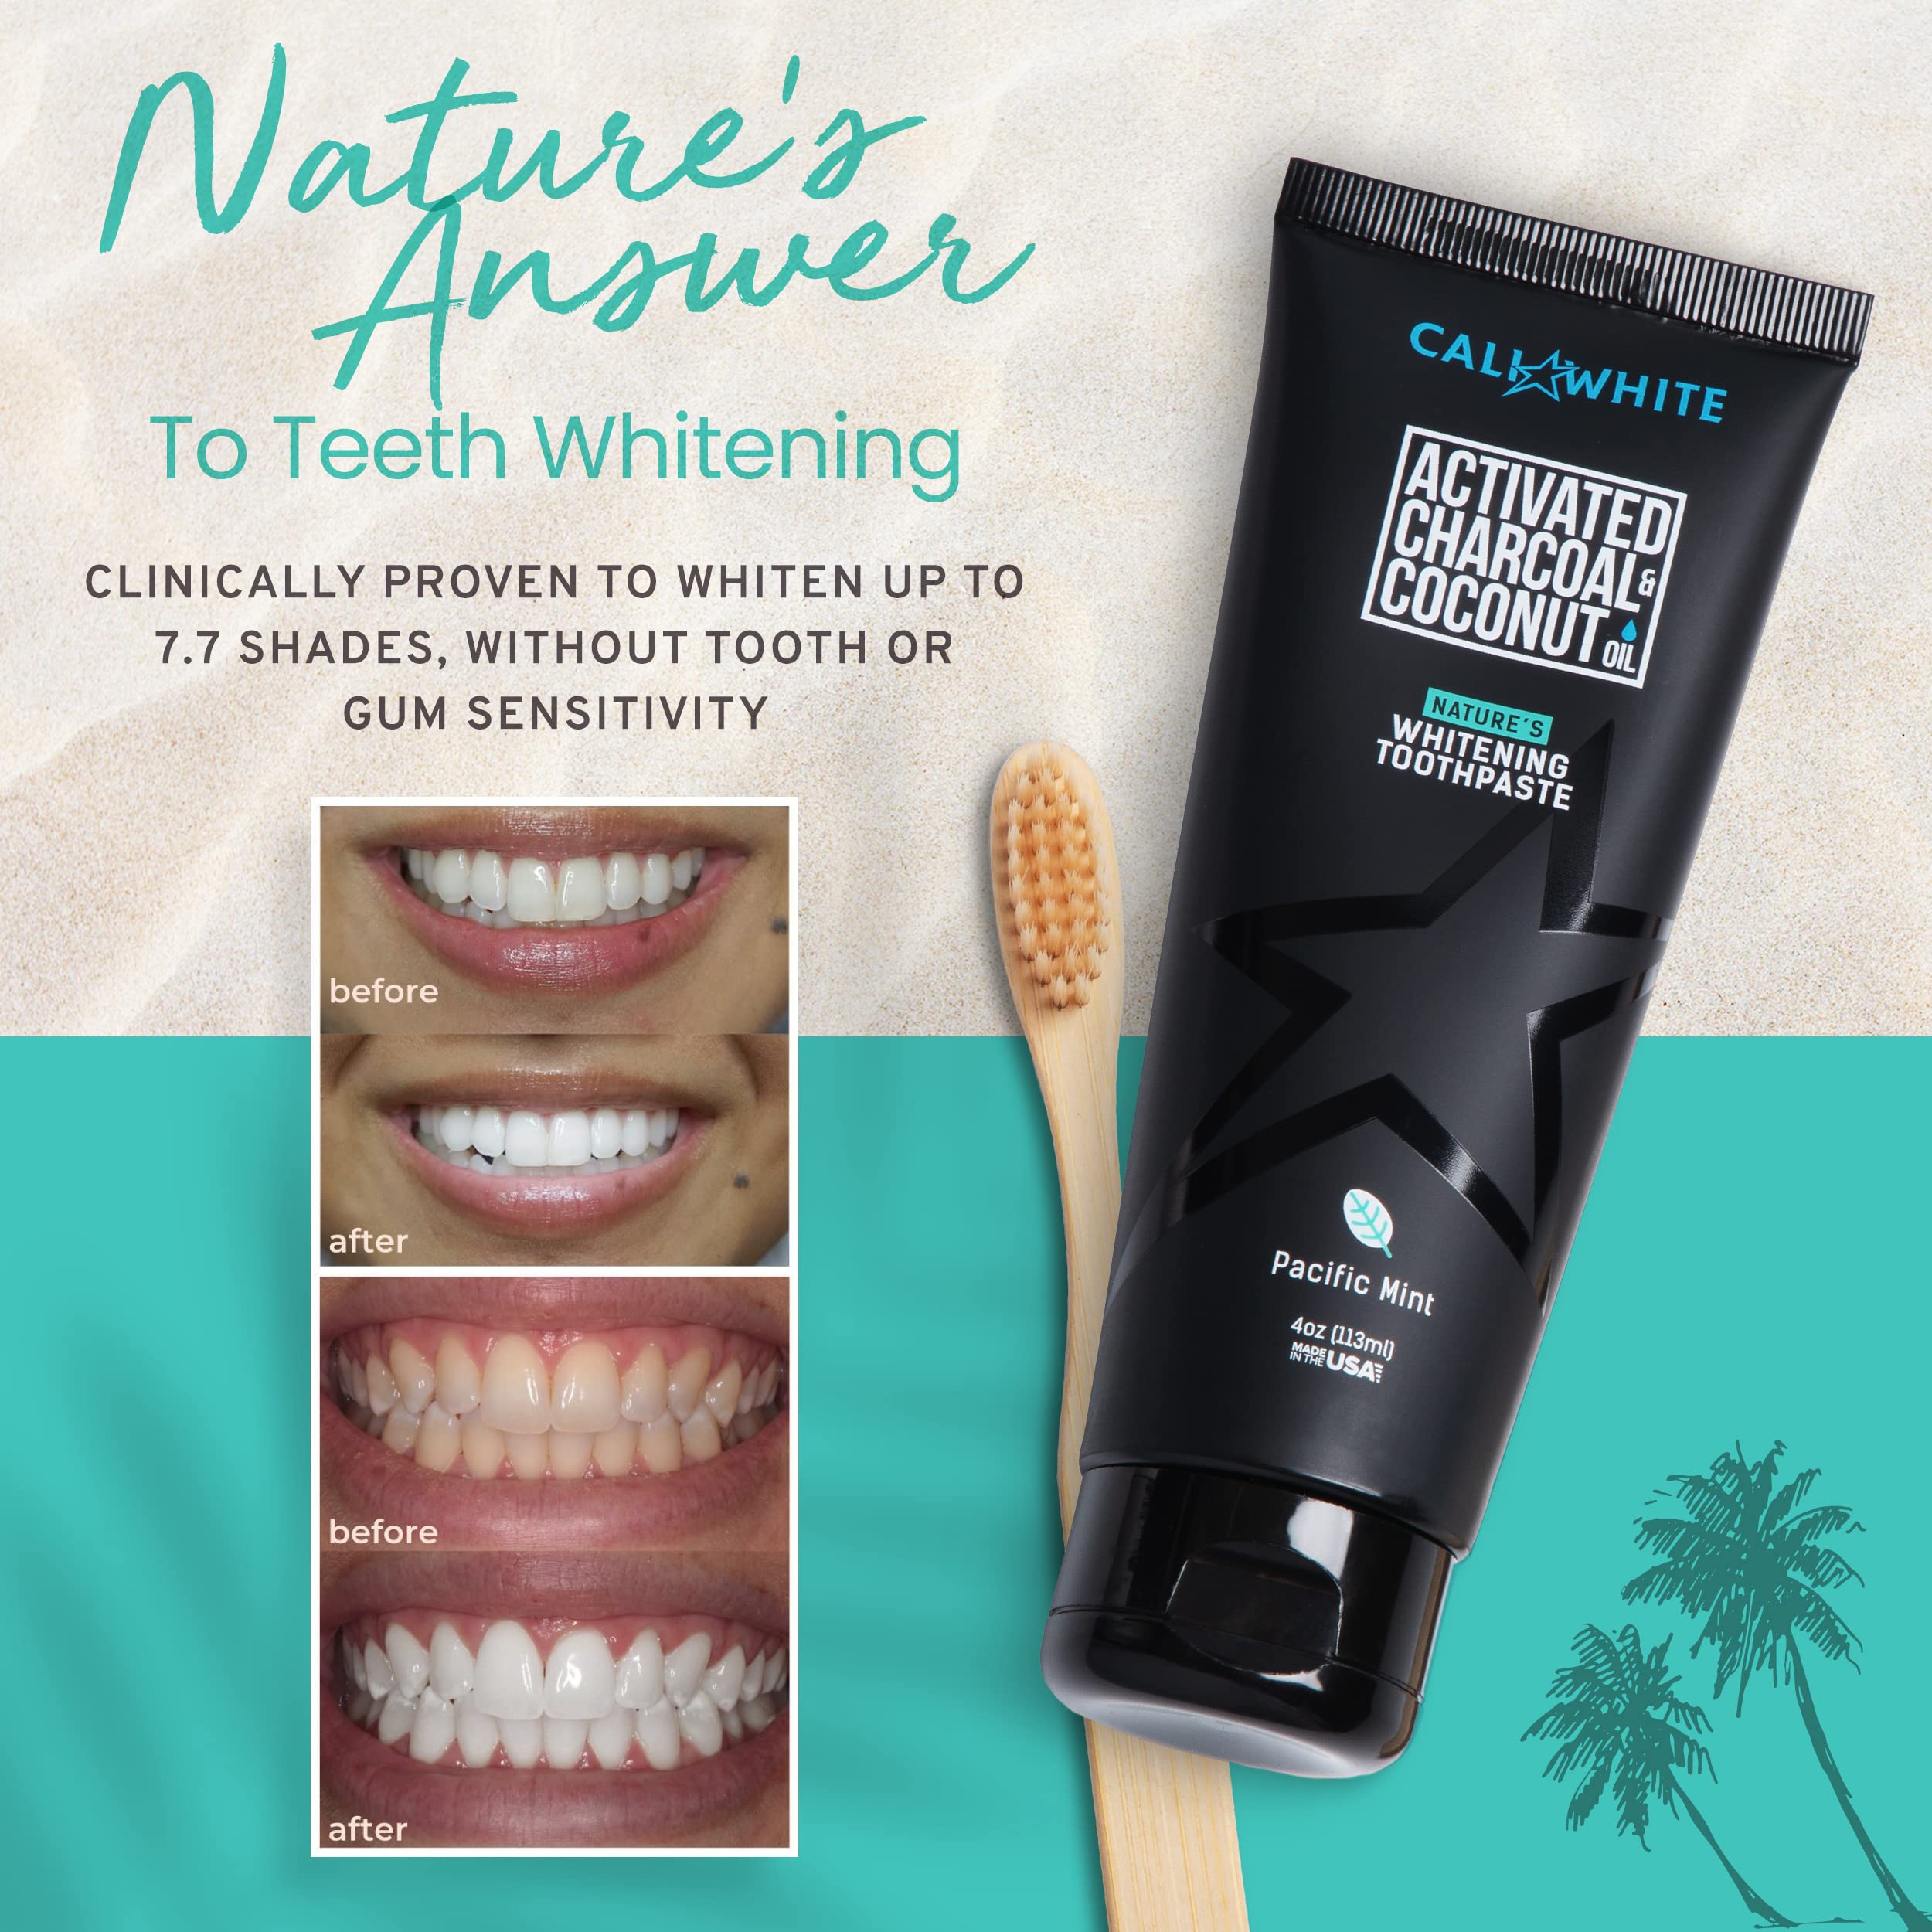 Cali White Fluoride Free Natural Whitening Toothpaste, Activated Charcoal Toothpaste, Vegan, Sulfate Free, Peroxide Free, SLS Free, Pacific Mint 4 oz, 1 Pack